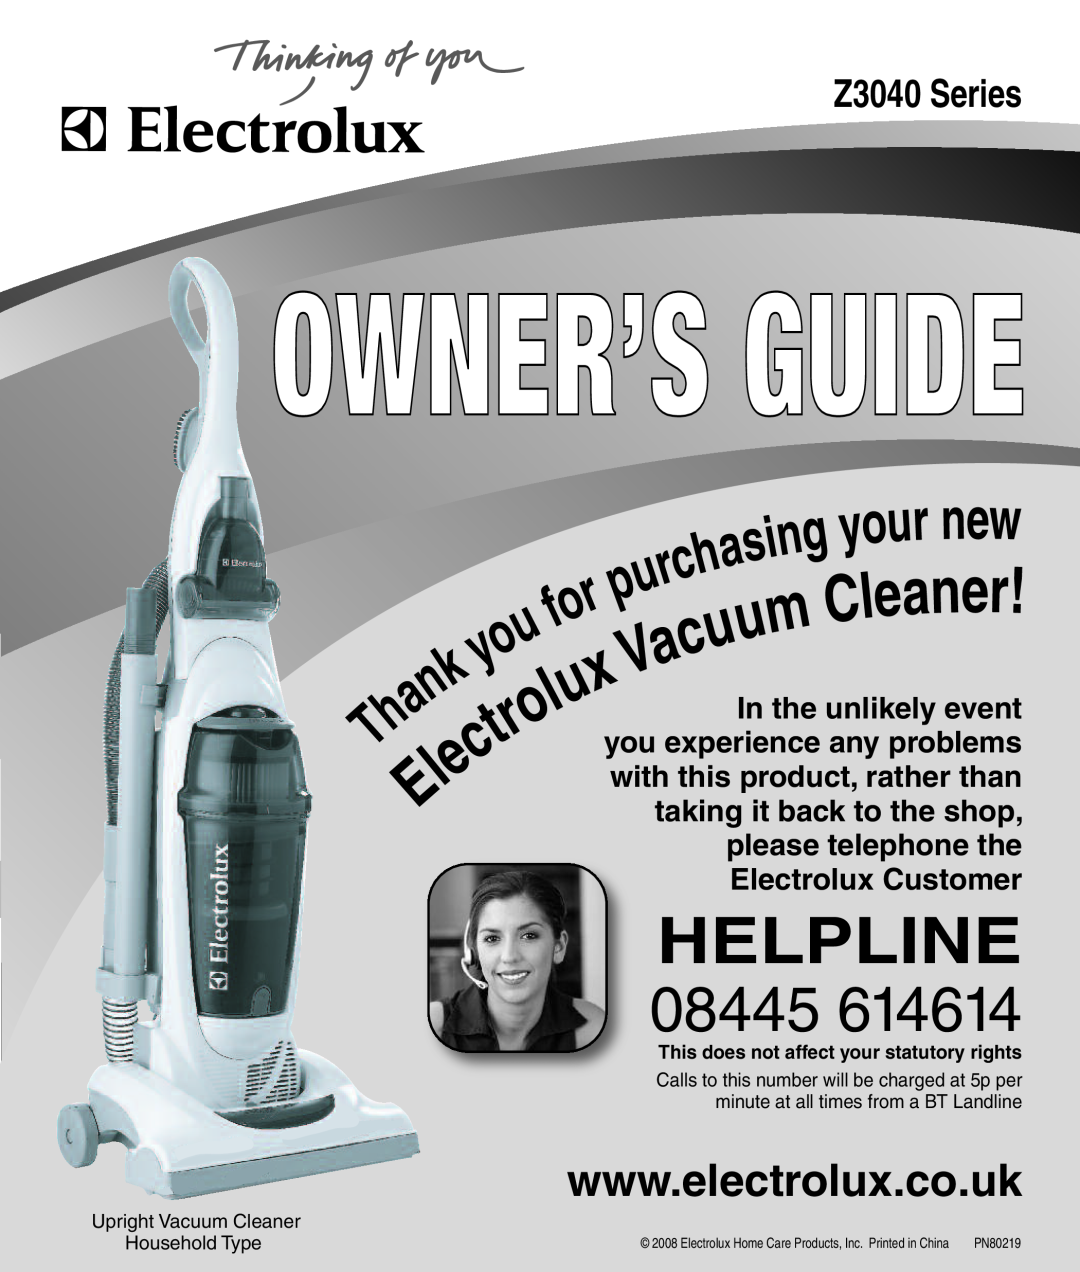 Electrolux Z3040 Series manual Helpline, 08445, taking it back to the shop, you experience any problems, Owner’S Guide 